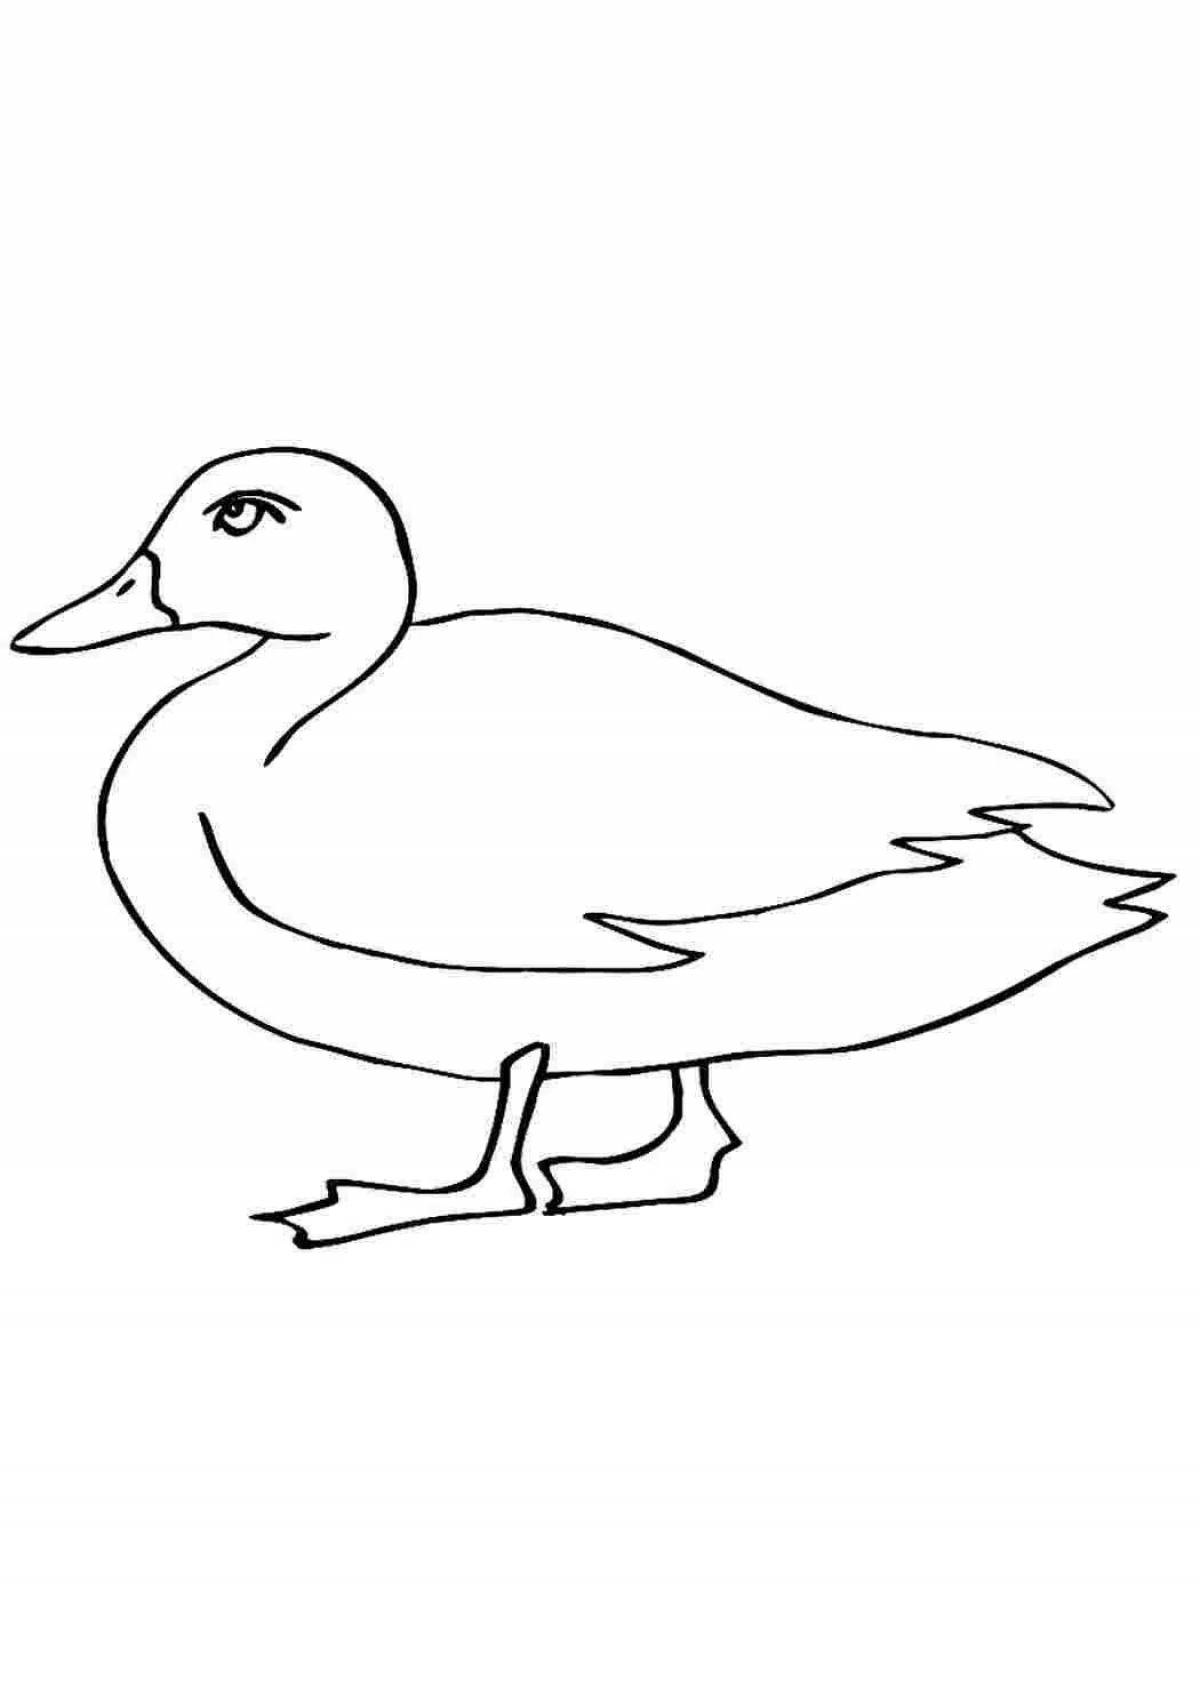 Duck picture for kids #3